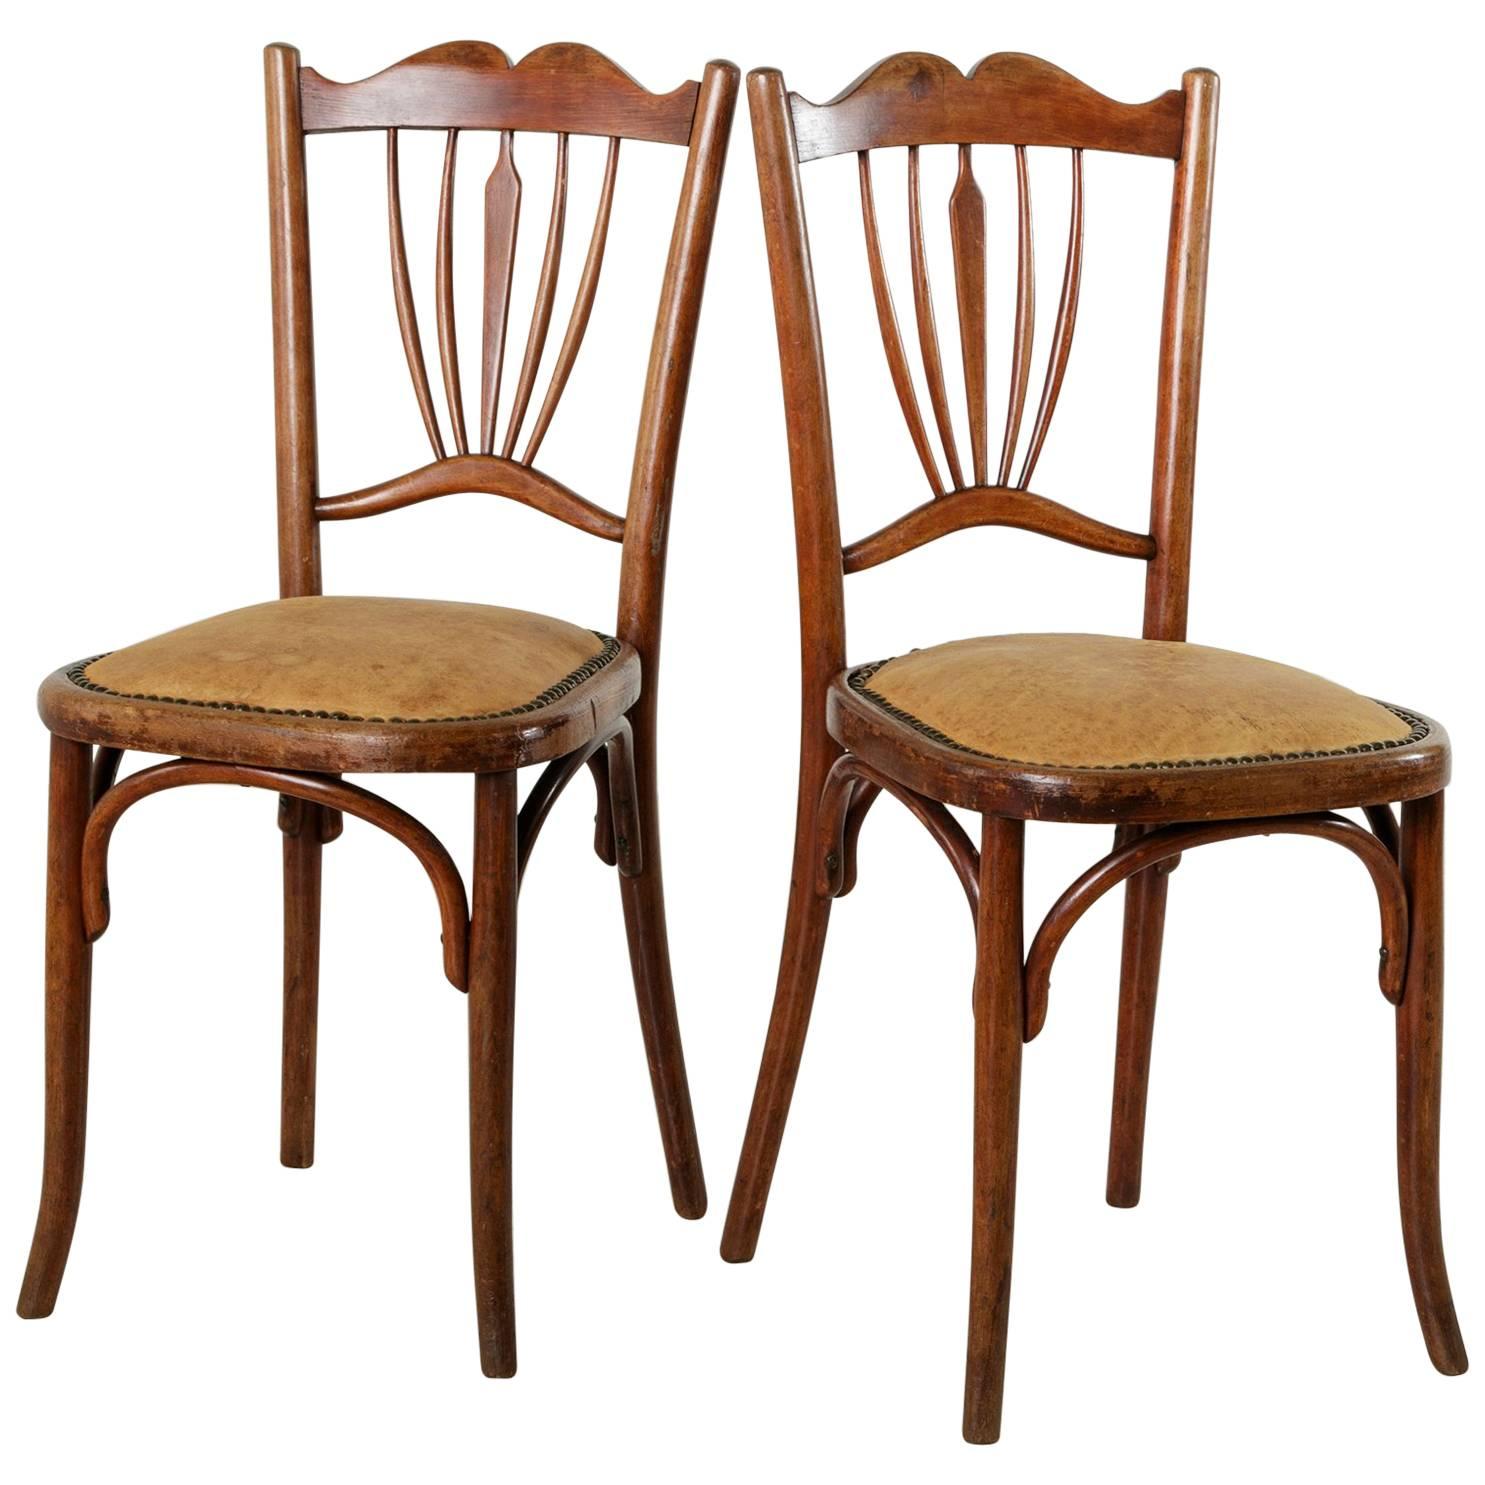 Pair of Early 20th Century French Art Deco Period Bentwood Thonet Bistro Chairs